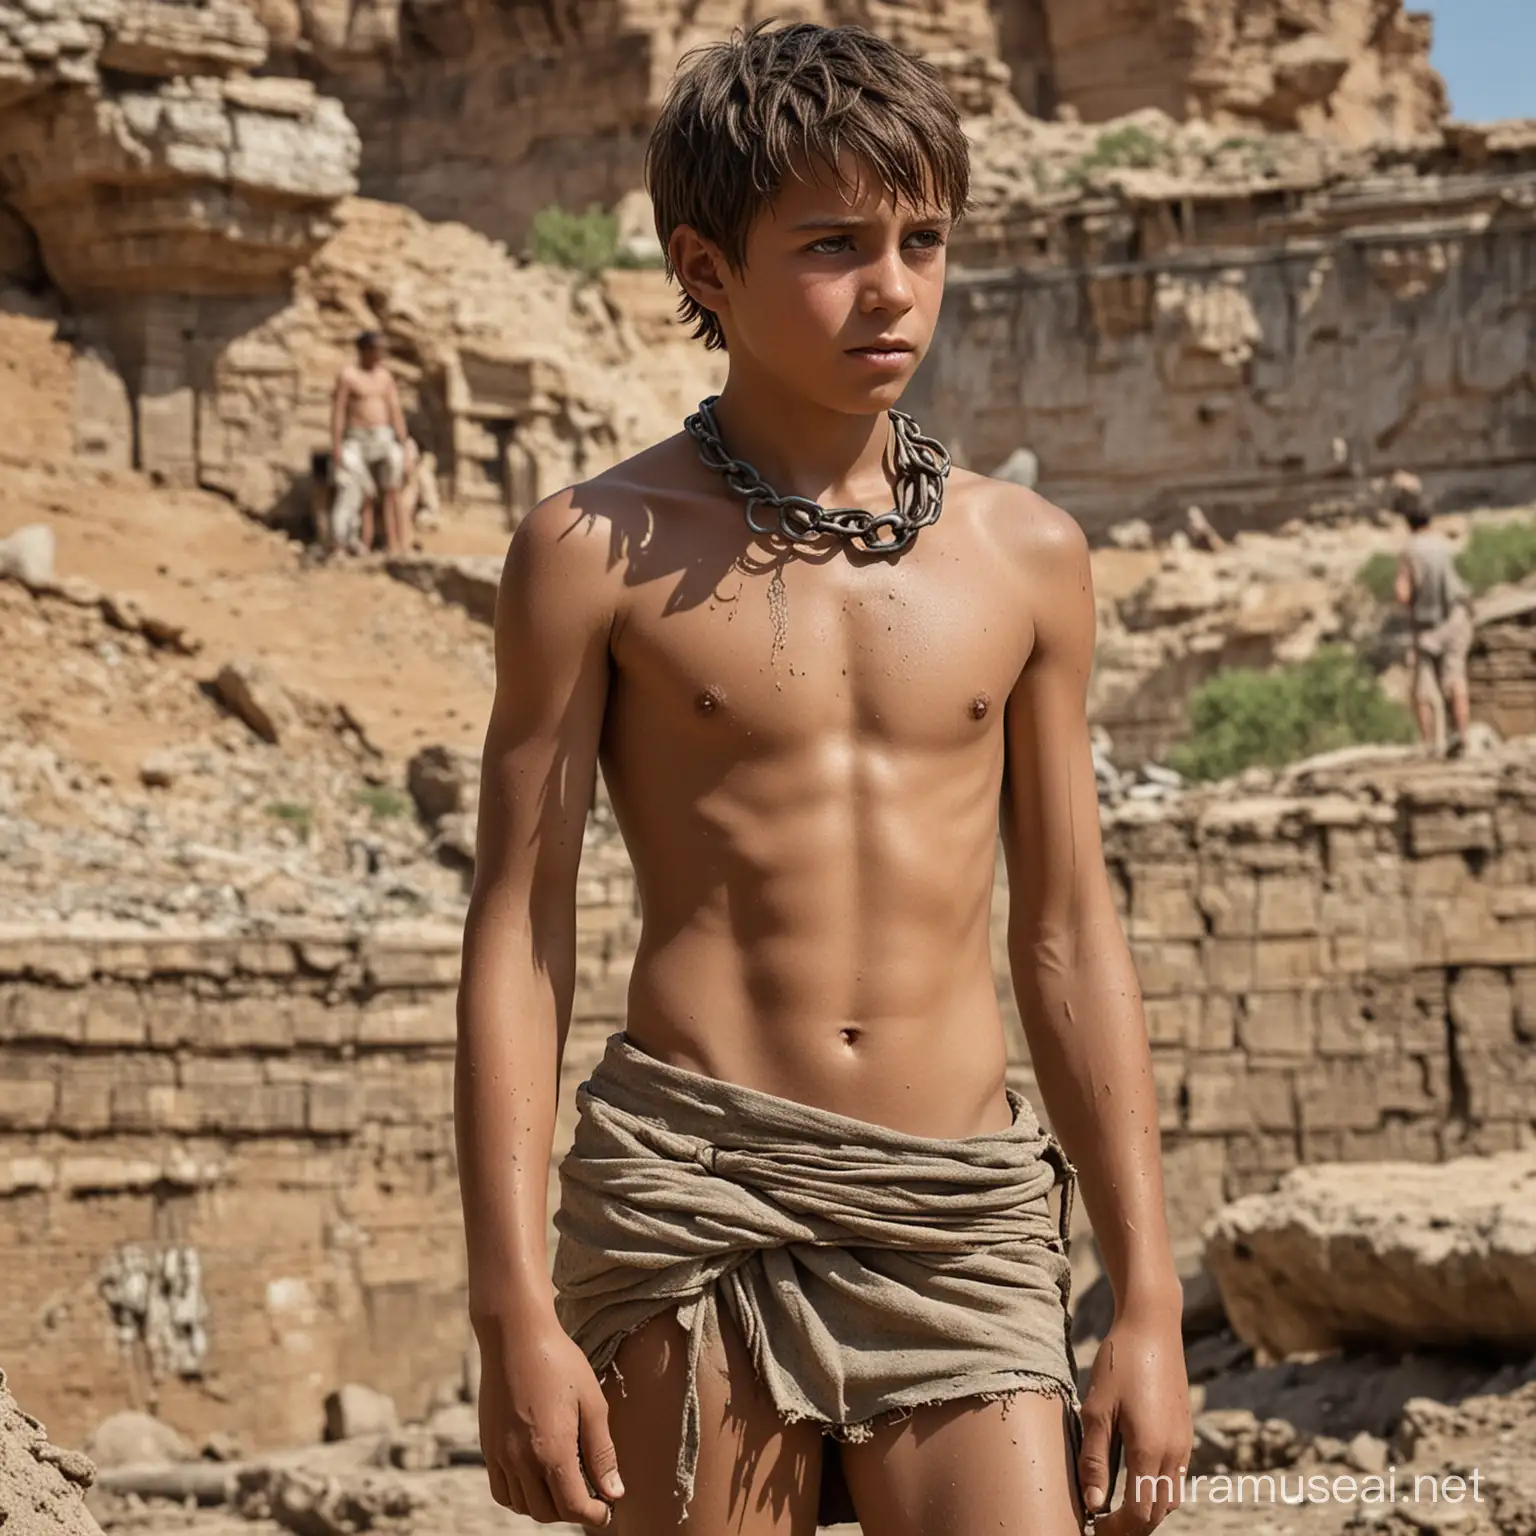 A photorealistic image of a muscular but hungry, well-tanned 14-year-old slave boy with a long torso in Ancient Rome. The boy is working in an ancient quarry. The boy has scars on his chest. (The boy wears only a very short, ragged loincloth worn low about the hips.) (The boy looks very young an innocent.) (The boy appears to be very dirty and covered in dirt.) The boy has long, messy hair. The boy is barefoot. The boy has very large and wide feet. The boy has very long toes. boy’s face is very clear and detailed. The boy is very innocent looking and has large eyes. The boy has a slave collar tightly encircling his neck. (((The iron collar is tight around the boy's neck.))) The iron collar is wrapped tightly around the boy's neck. The slave collar is shown in detail. Nothing covers the boy's feet. The boy has long, messy hair. The quarry is very hot and dry. (((The boy looks like a slave.))) ((The boy's feet have 5 long toes with toenails.)) (((The boy's feet are very detailed.))) The boy has a well-defined chest and abdomen.